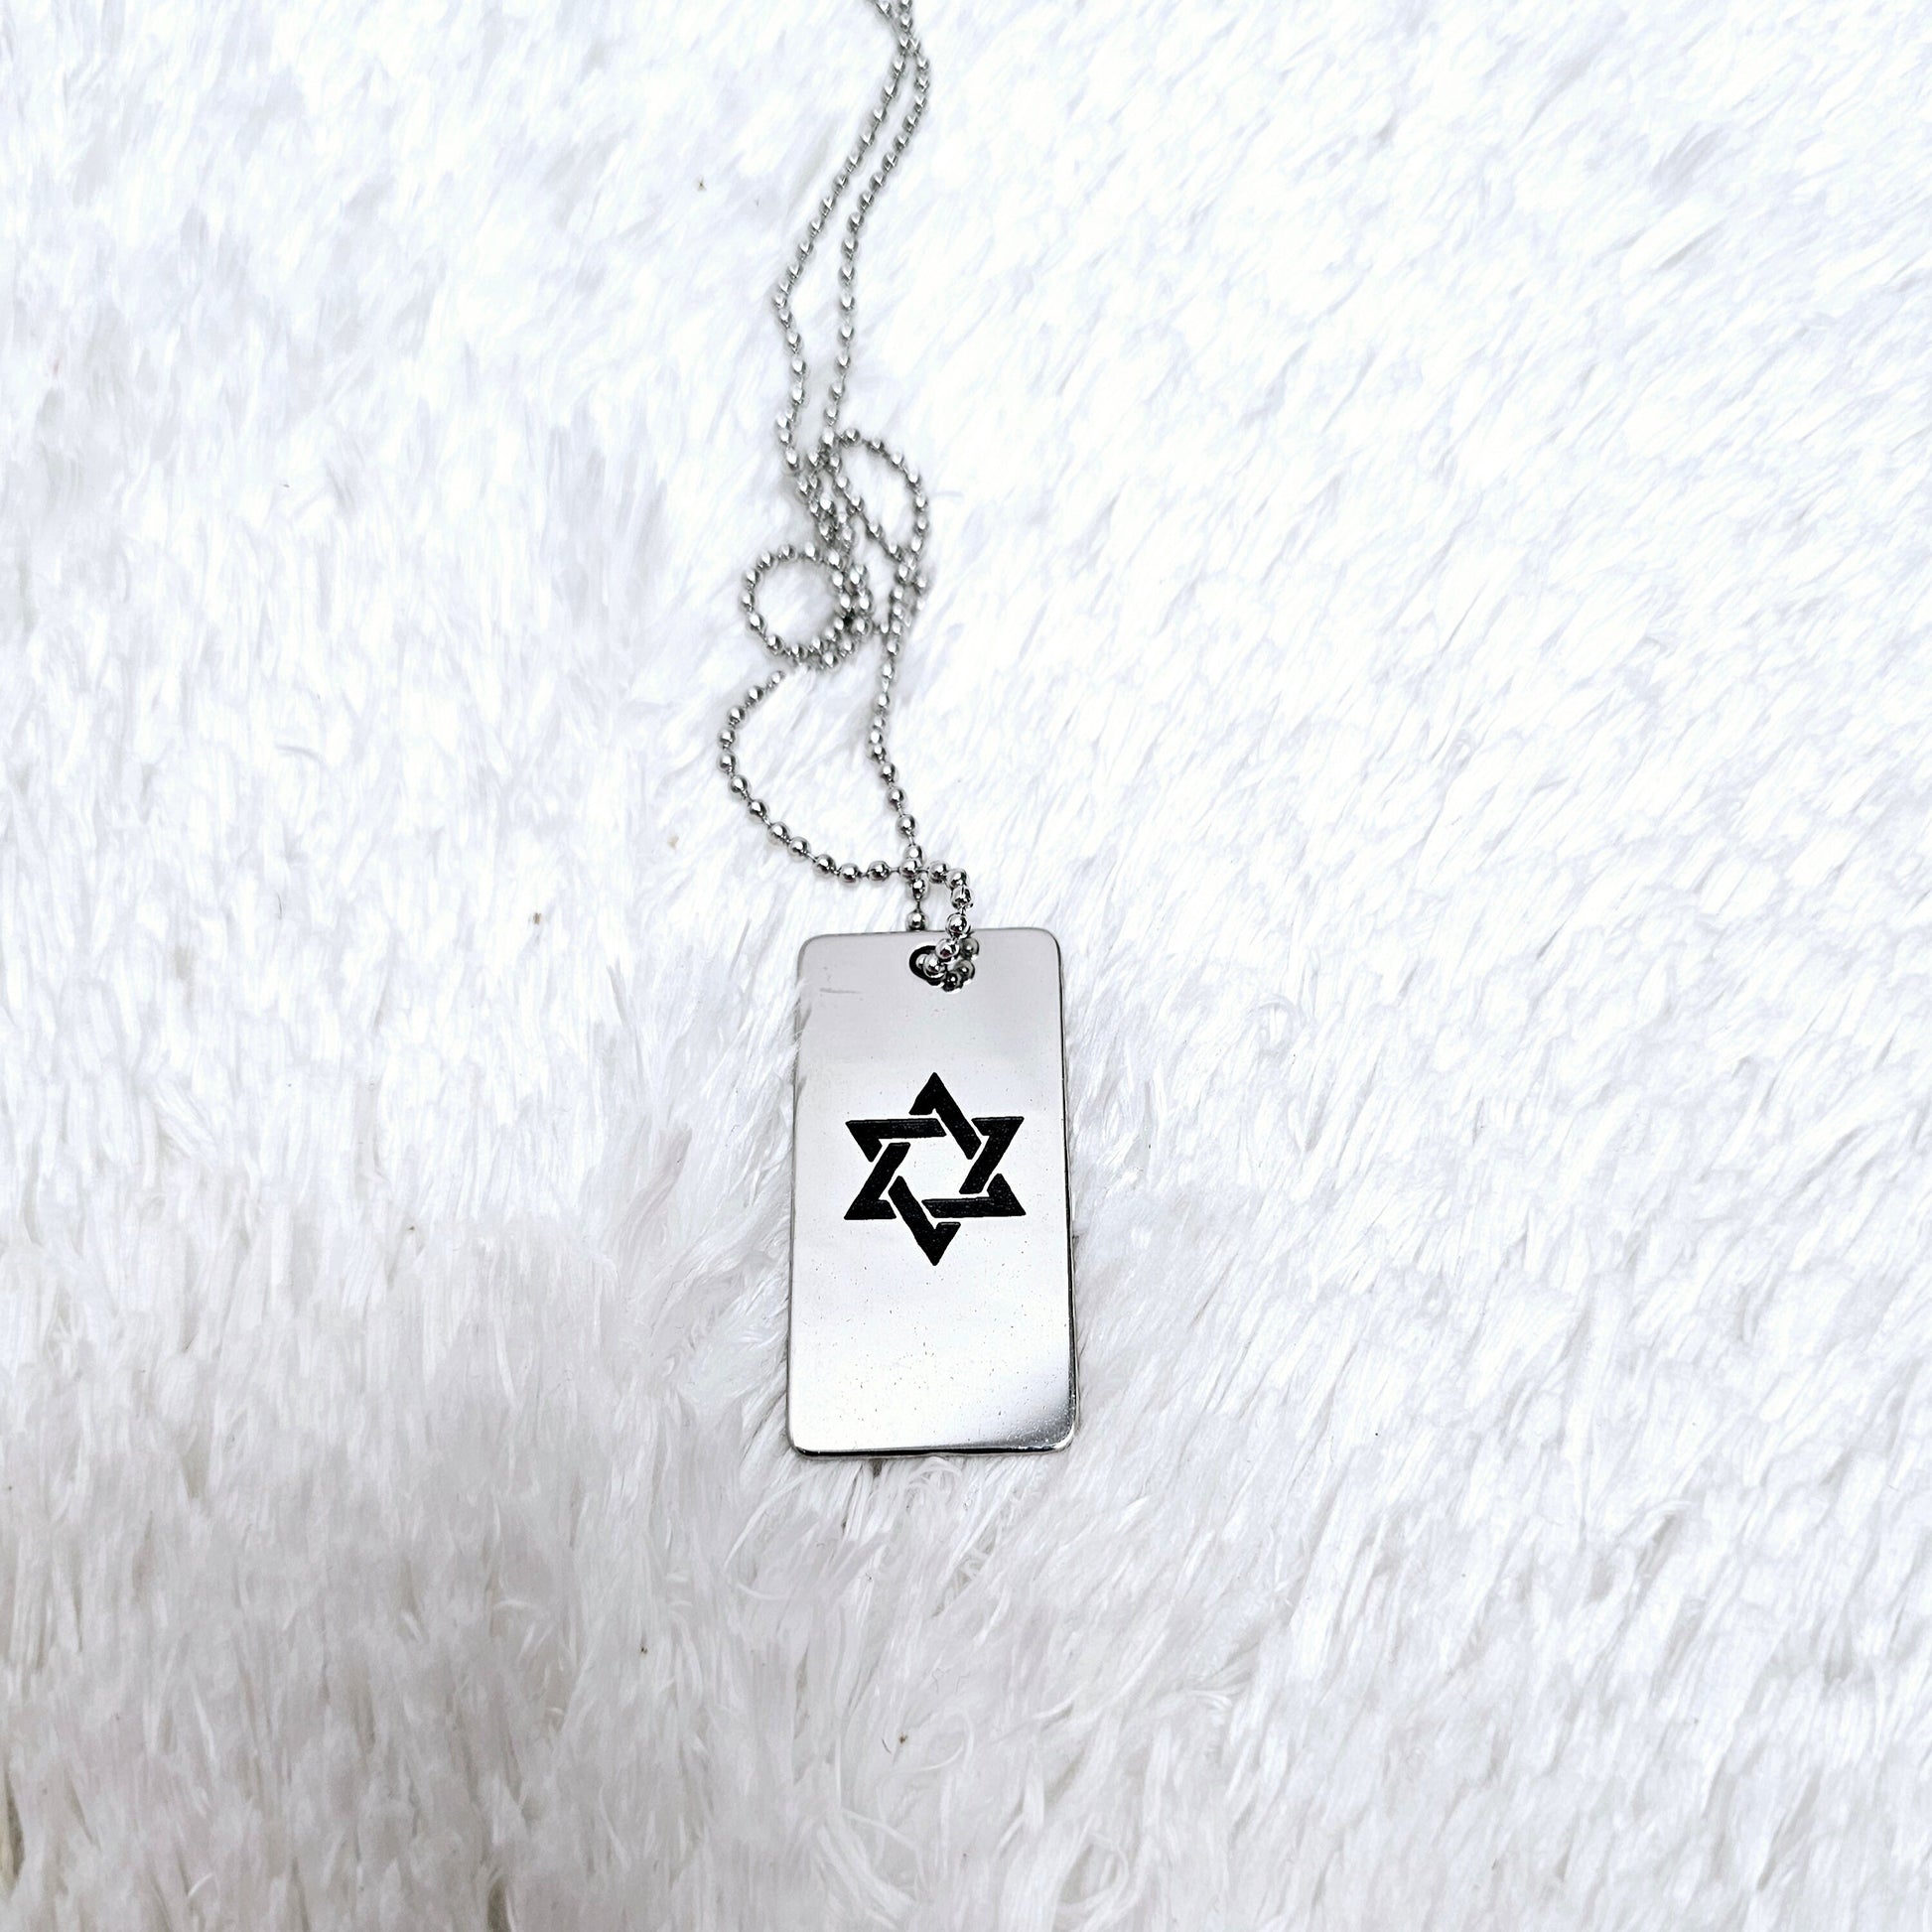 Custom stainless steel disc necklace engraved with Shema Israel's prayer and David Star